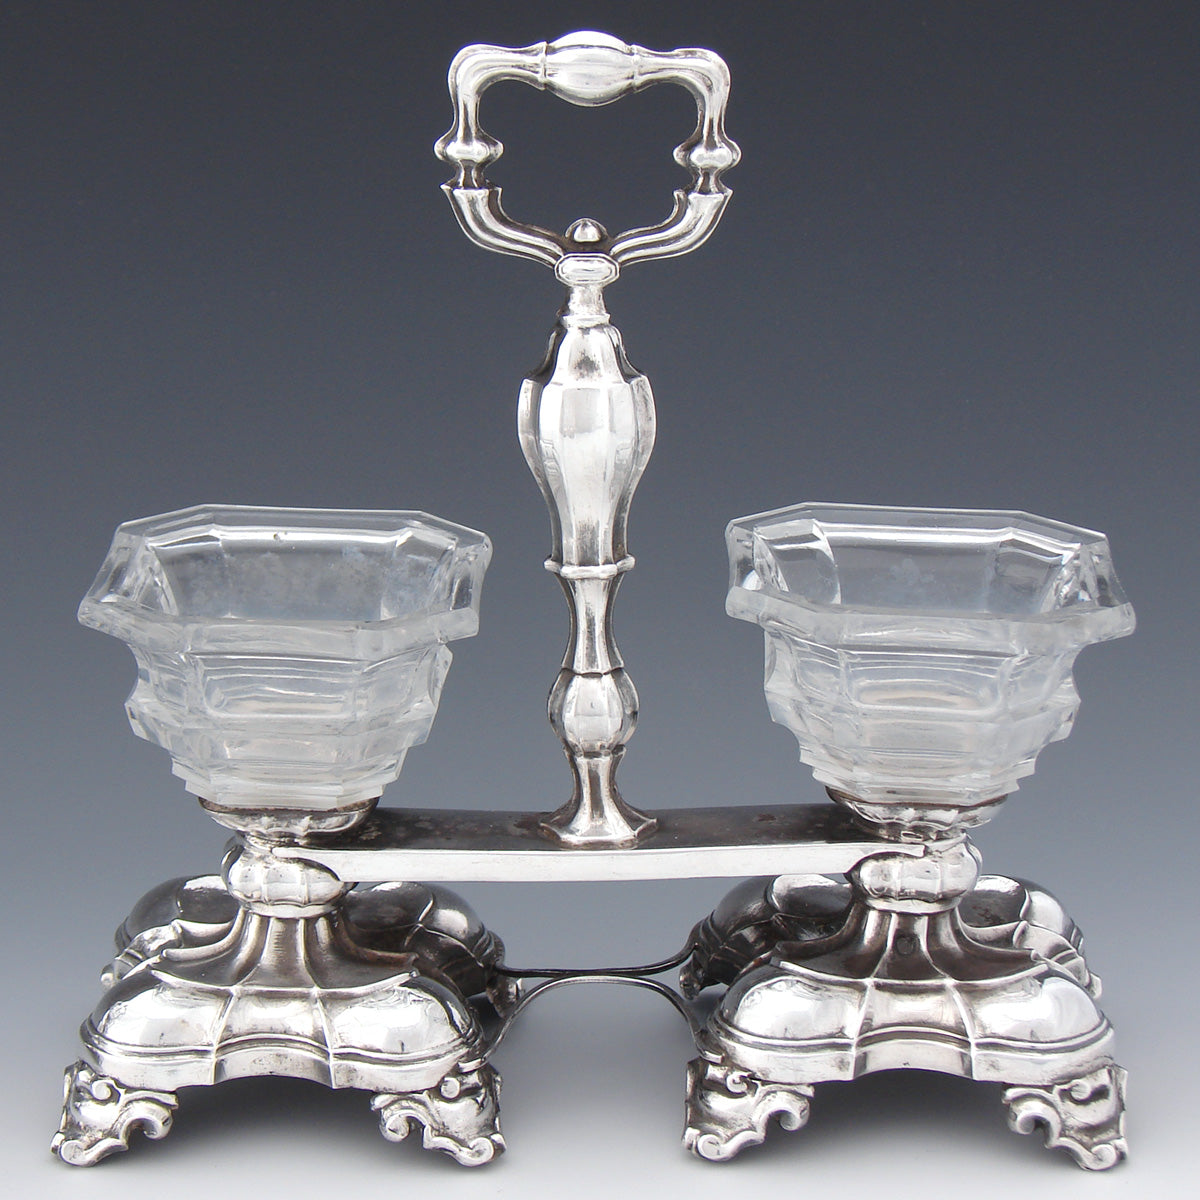 PAIR Antique Napoleon III Era French Sterling Silver Double Open Salt or Sweetmeat Caddies, Stands